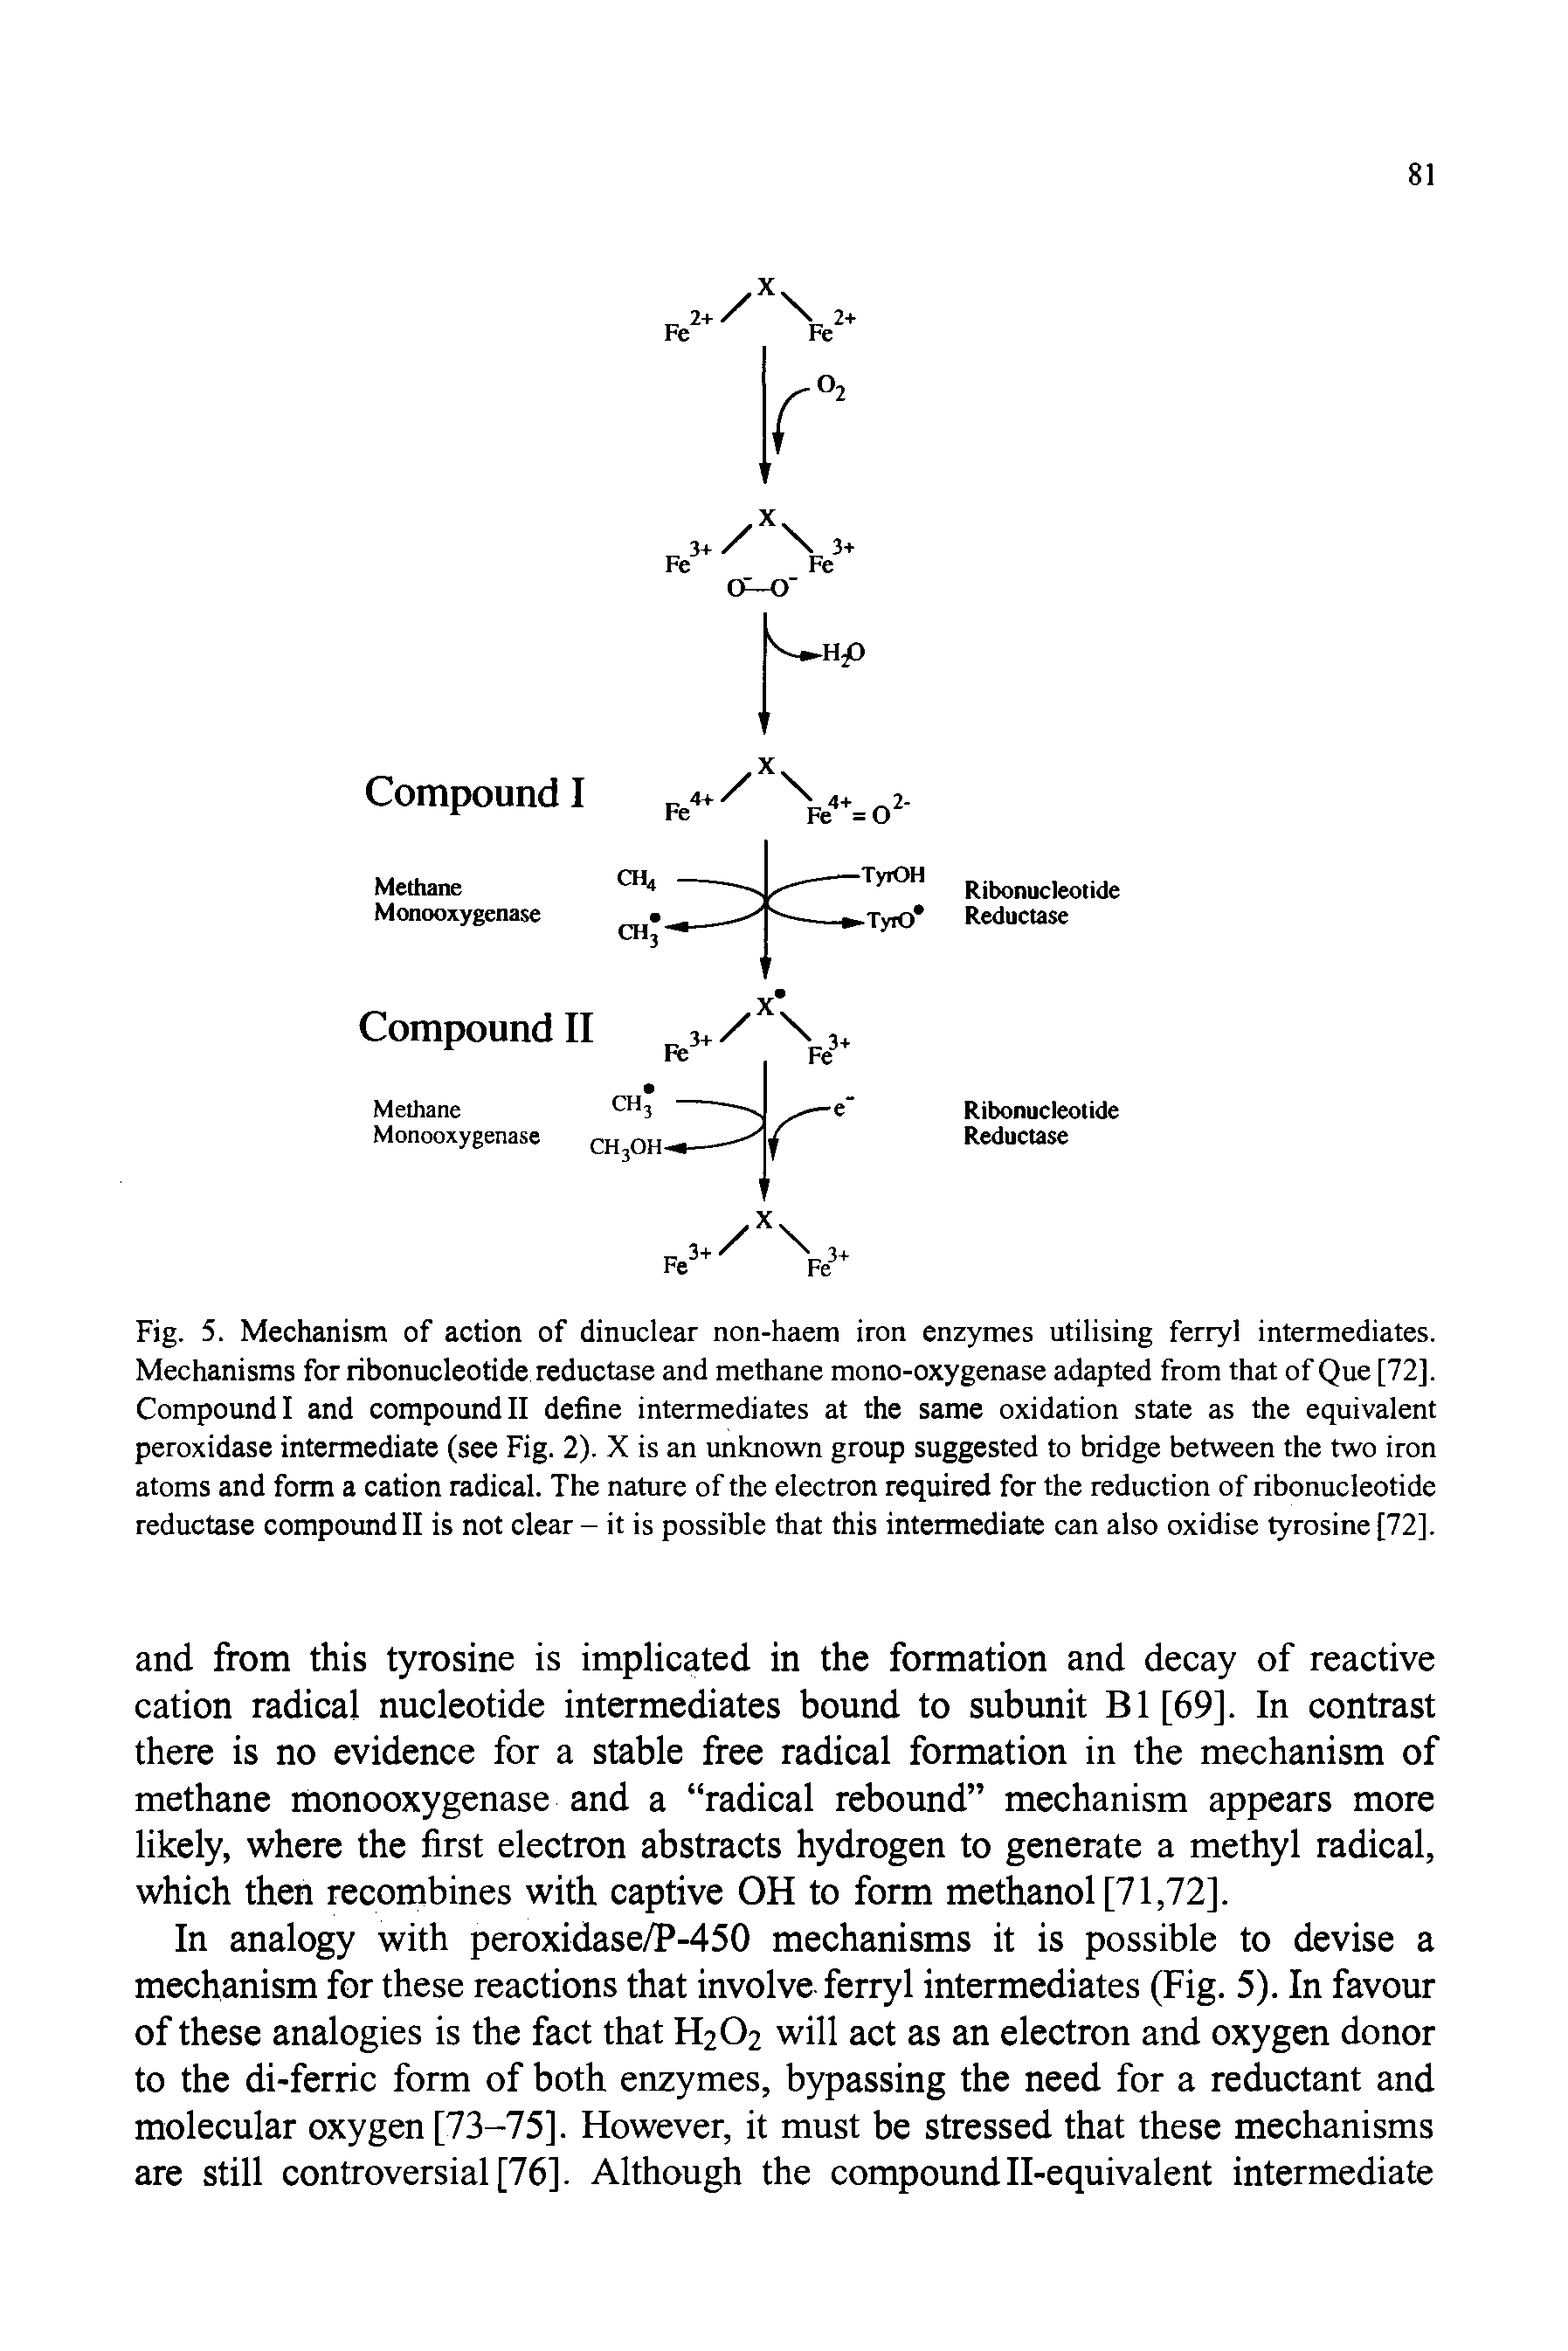 Fig. 5. Mechanism of action of dinuclear non-haem iron enzymes utilising ferryl intermediates. Mechanisms for ribonucleotide reductase and methane mono-oxygenase adapted from that of Que [72]. Compound I and compound II define intermediates at the same oxidation state as the equivalent peroxidase intermediate (see Fig. 2). X is an unknown group suggested to bridge between the two iron atoms and form a cation radical. The nature of the electron required for the reduction of ribonucleotide reductase compound II is not clear - it is possible that this intermediate can also oxidise tyrosine [72].